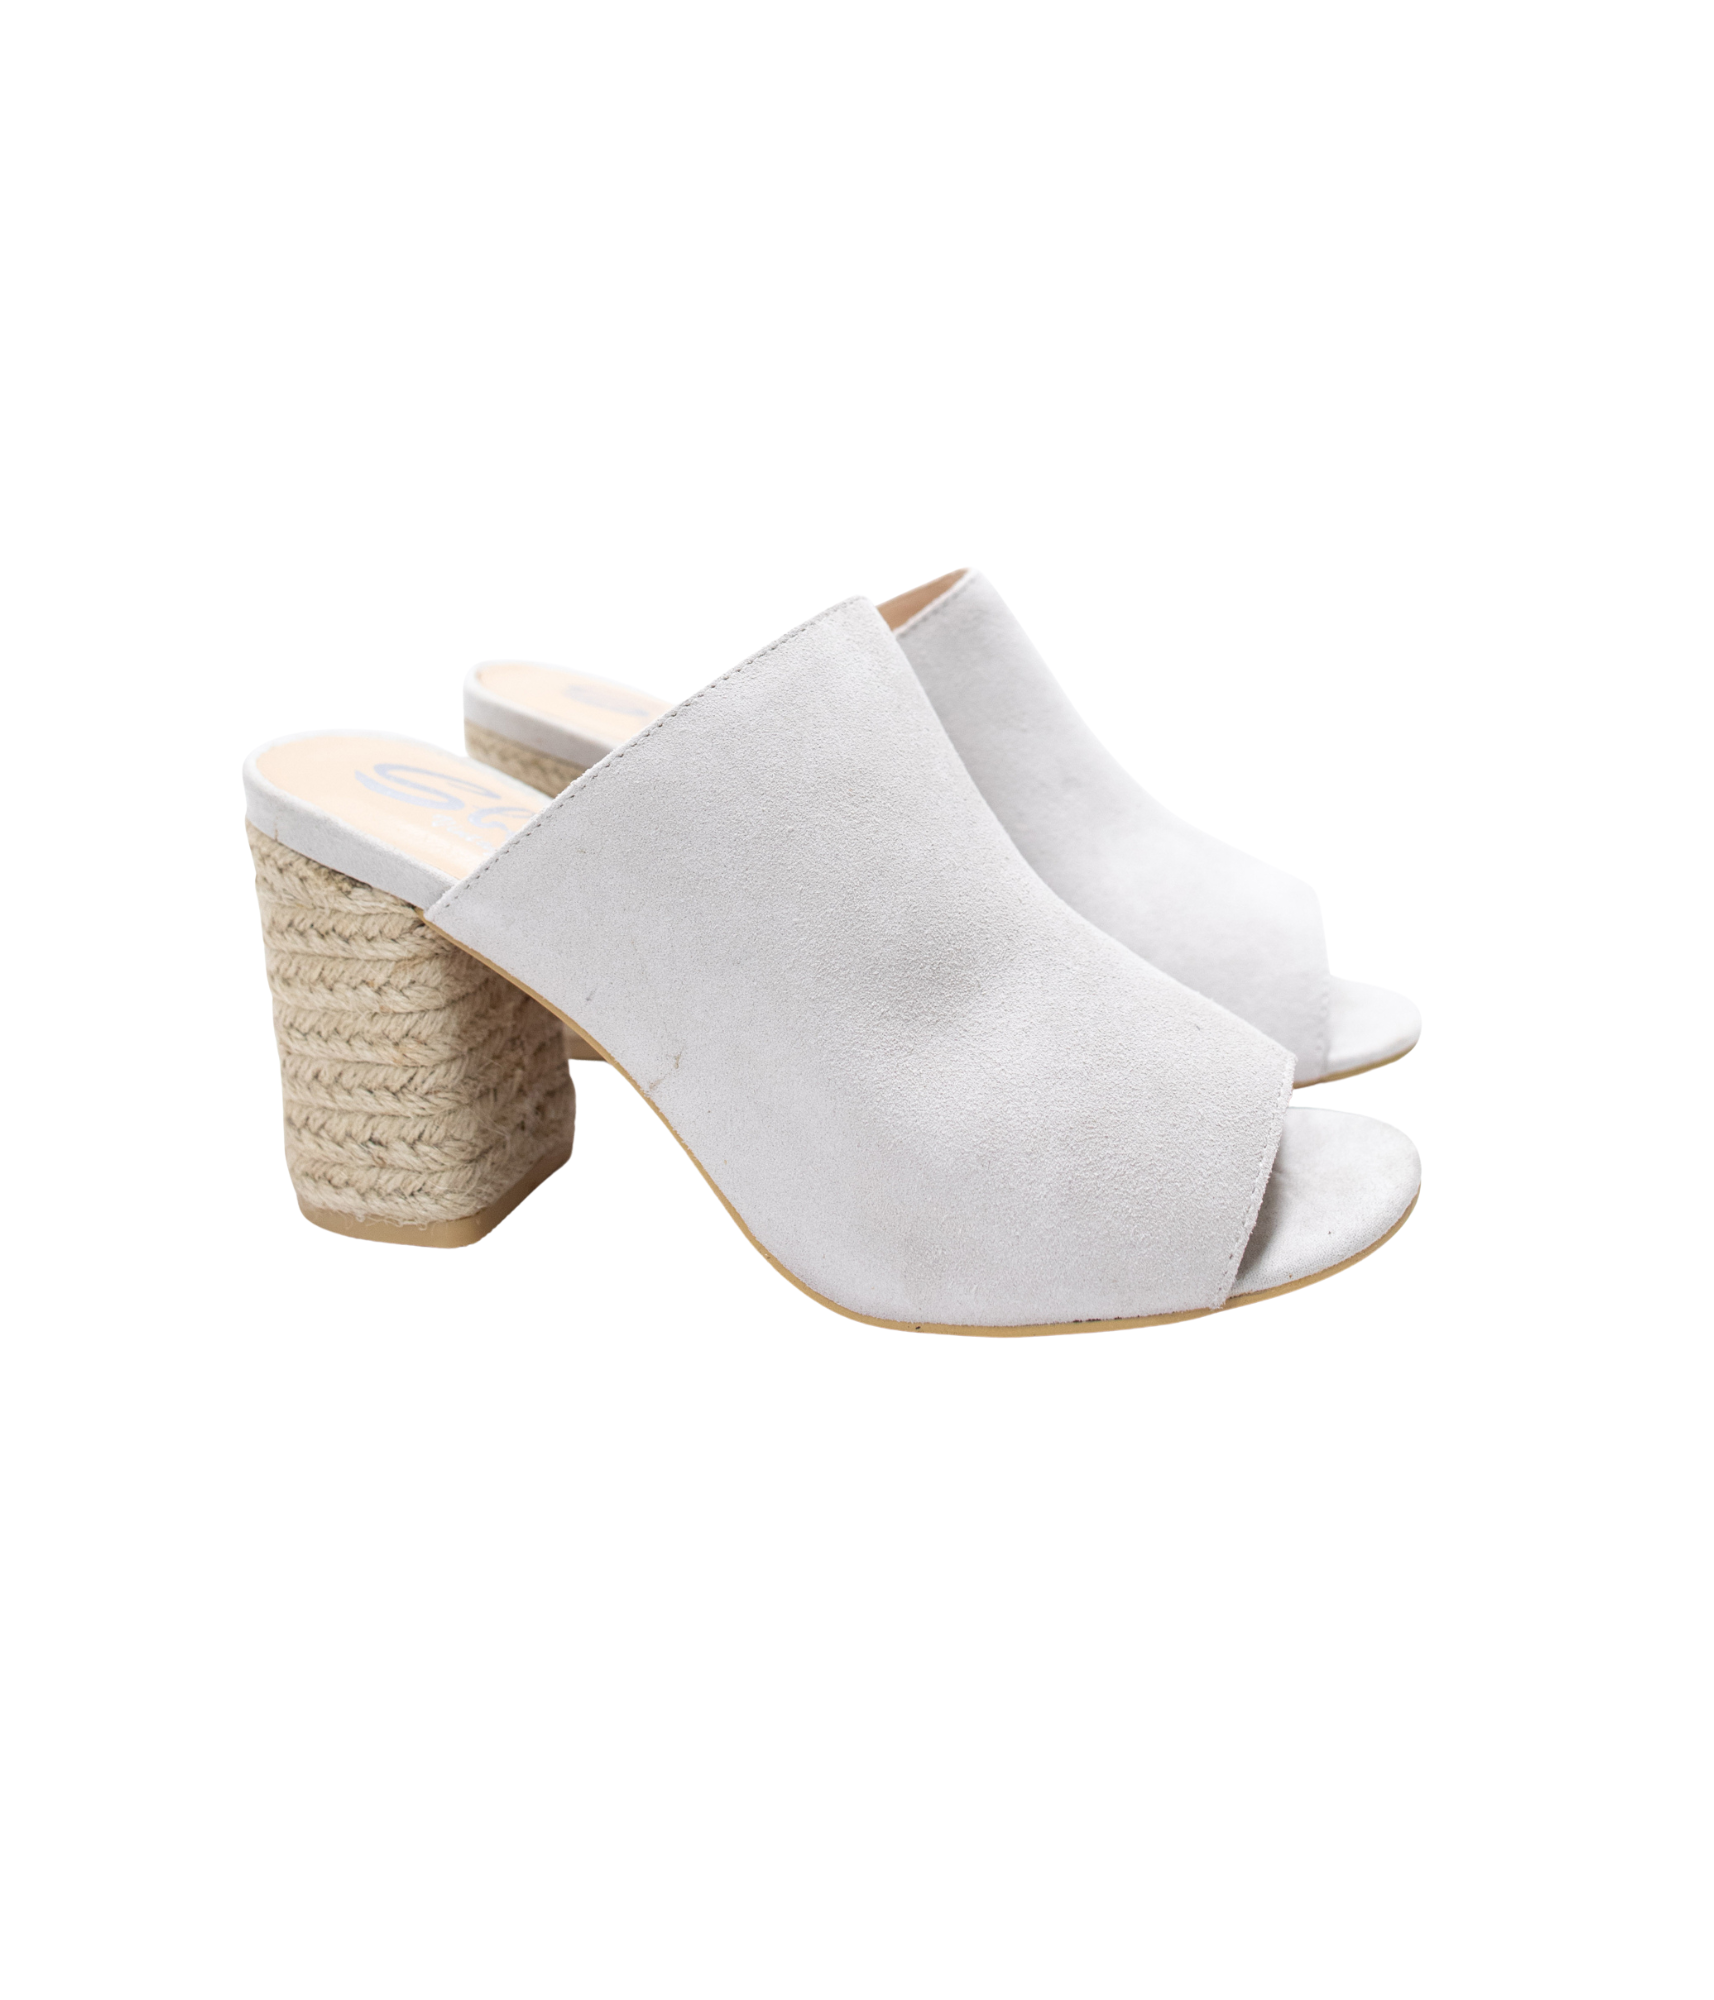 Helena Heeled Sandal in Ice Suede